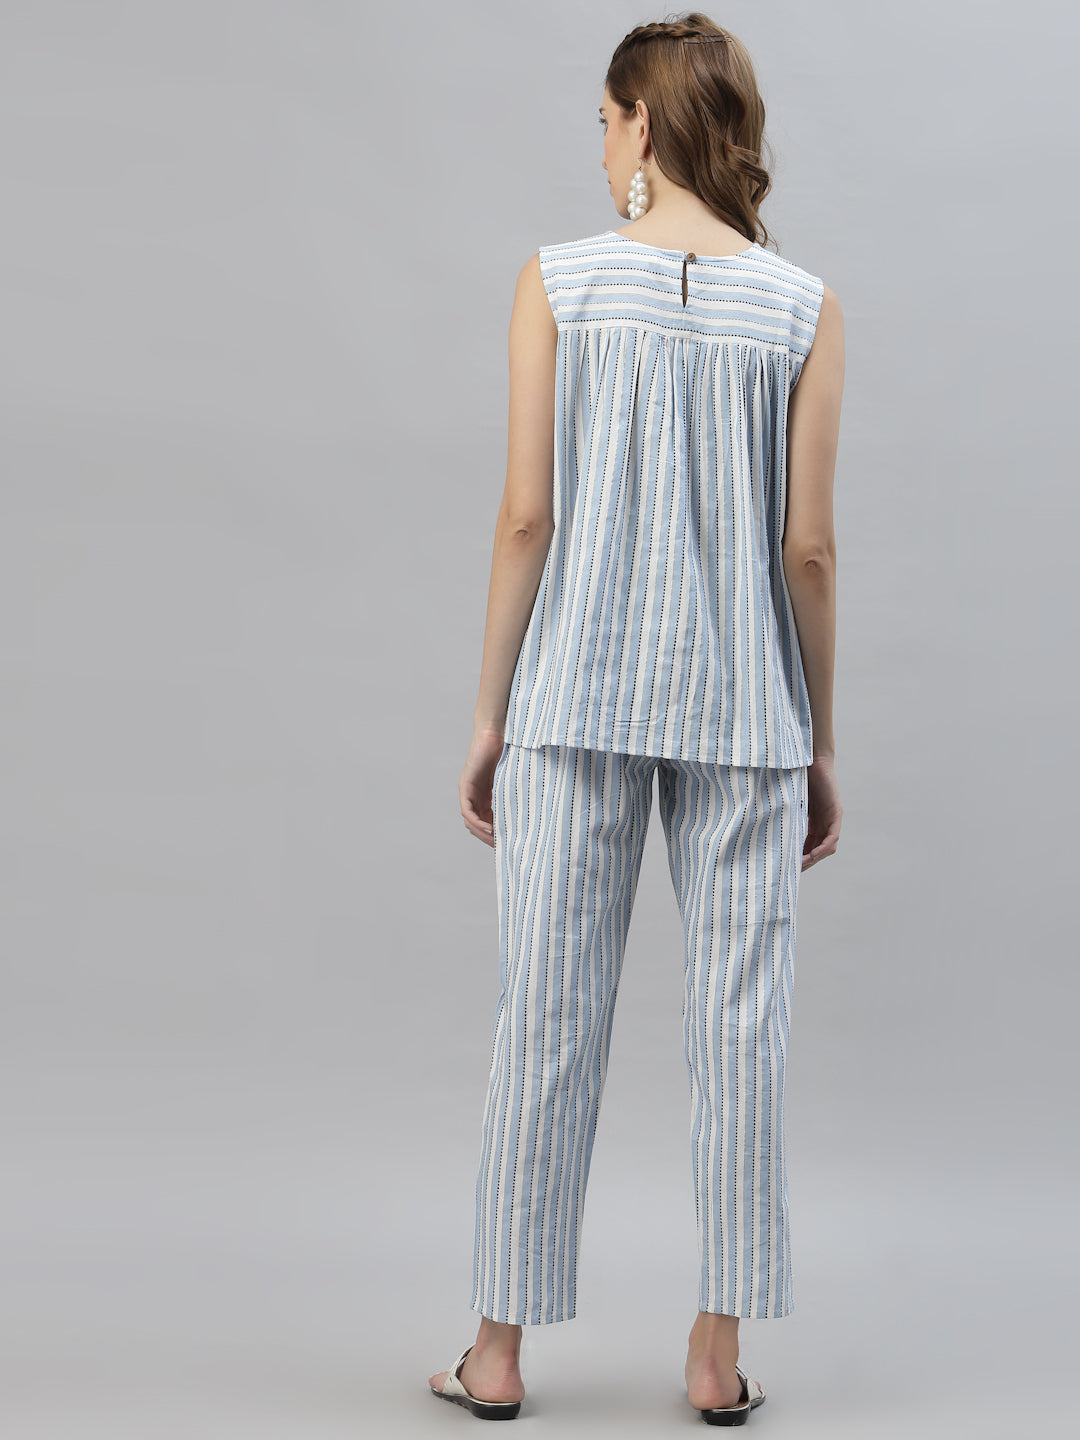 Self Woven Striped Cotton Blend Top and Pant Set